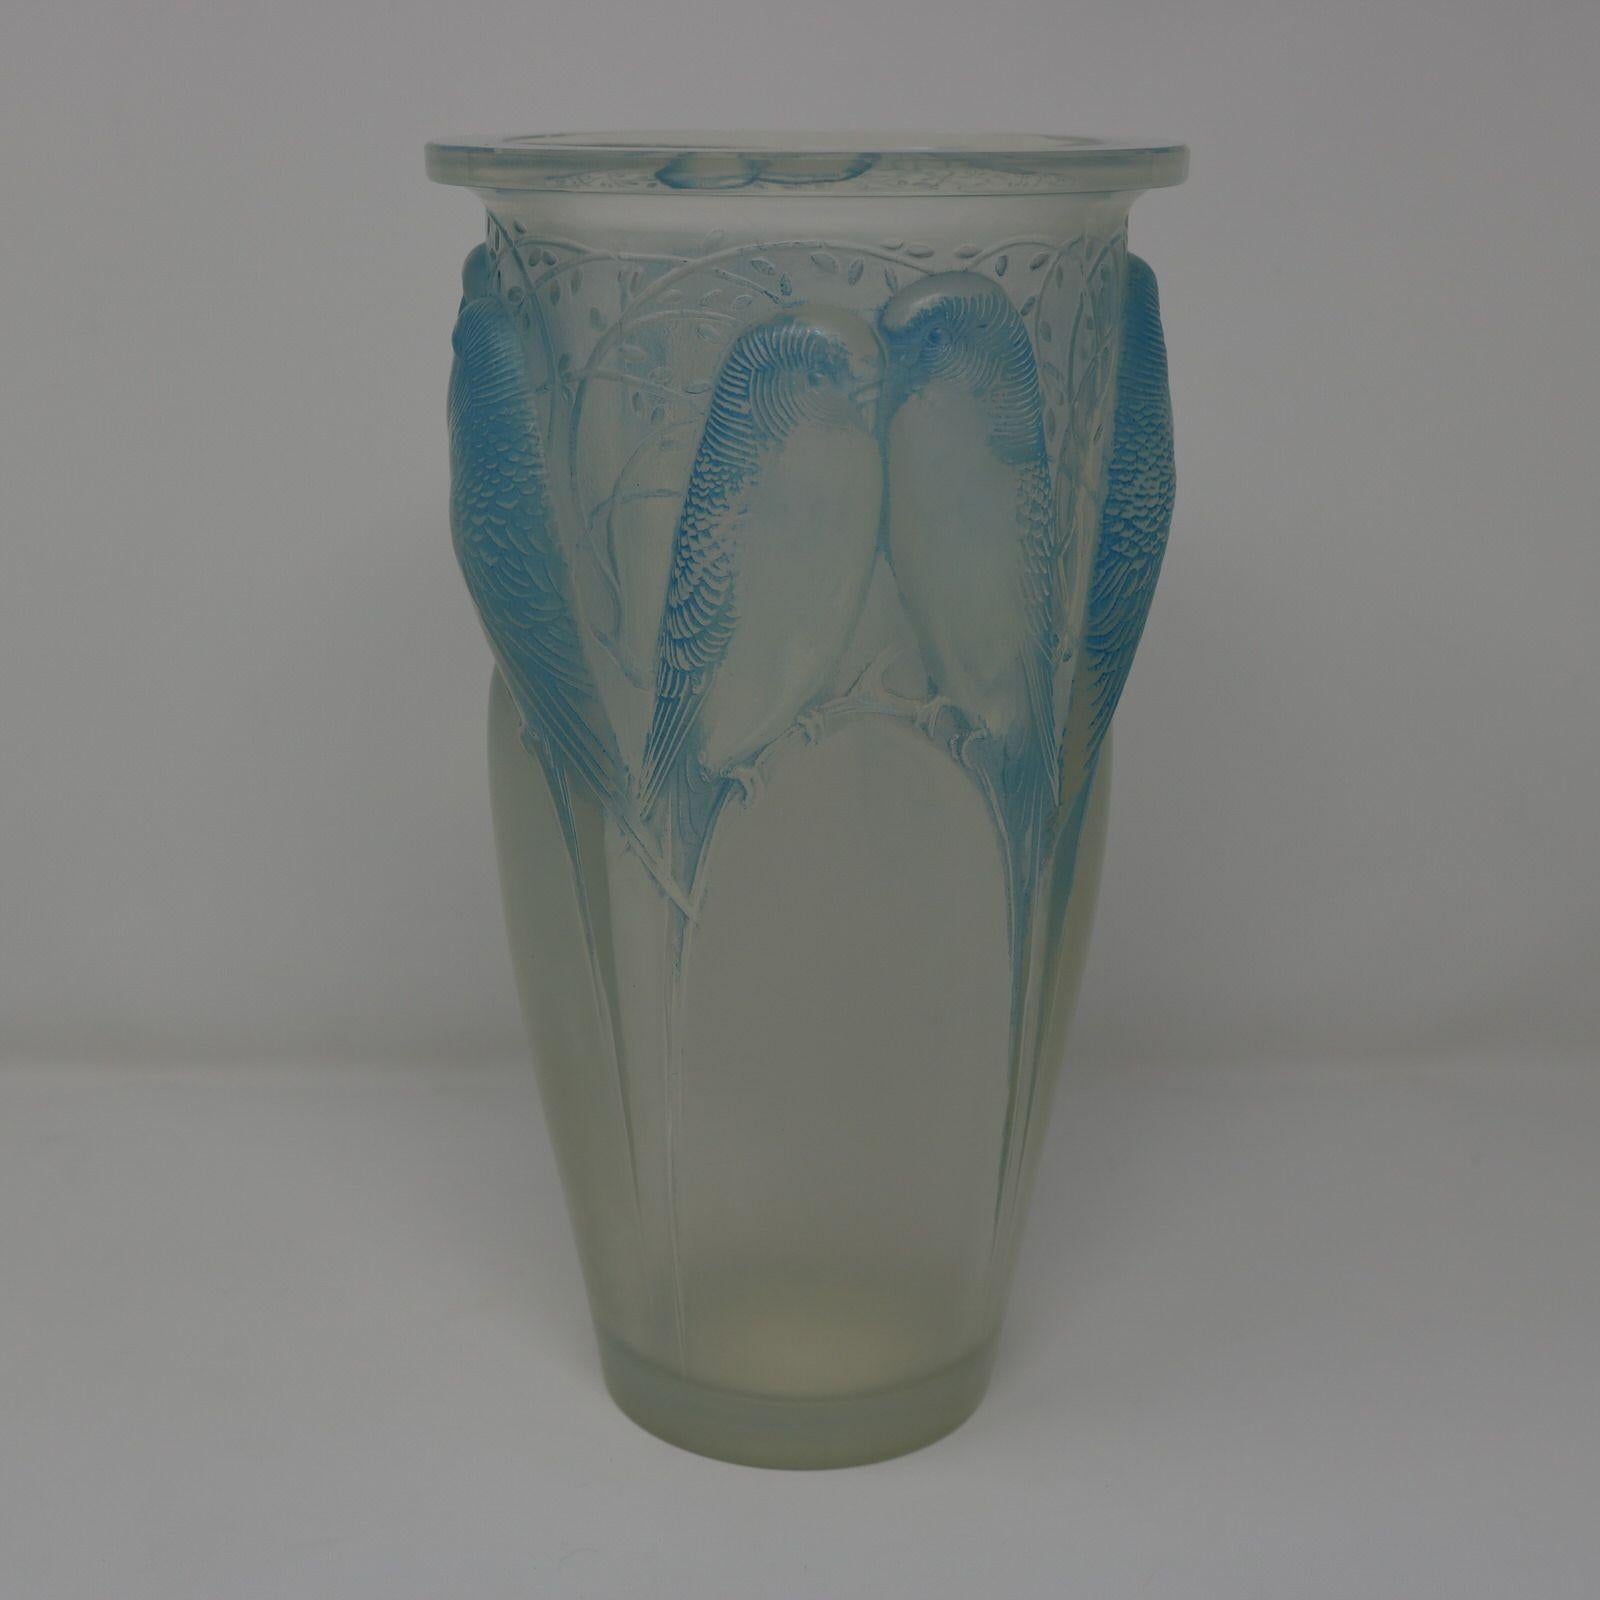 Rene Lalique Opalescent Glass 'Ceylan' Vase. Blue staining to details. This pattern features parakeets, side by side. Wheel cut and engraved makers mark, 'R. LALIQUE FRANCE No.905'. Book reference: 'R. LALIQUE Catalogue Raisonne De L'Oeuvre De